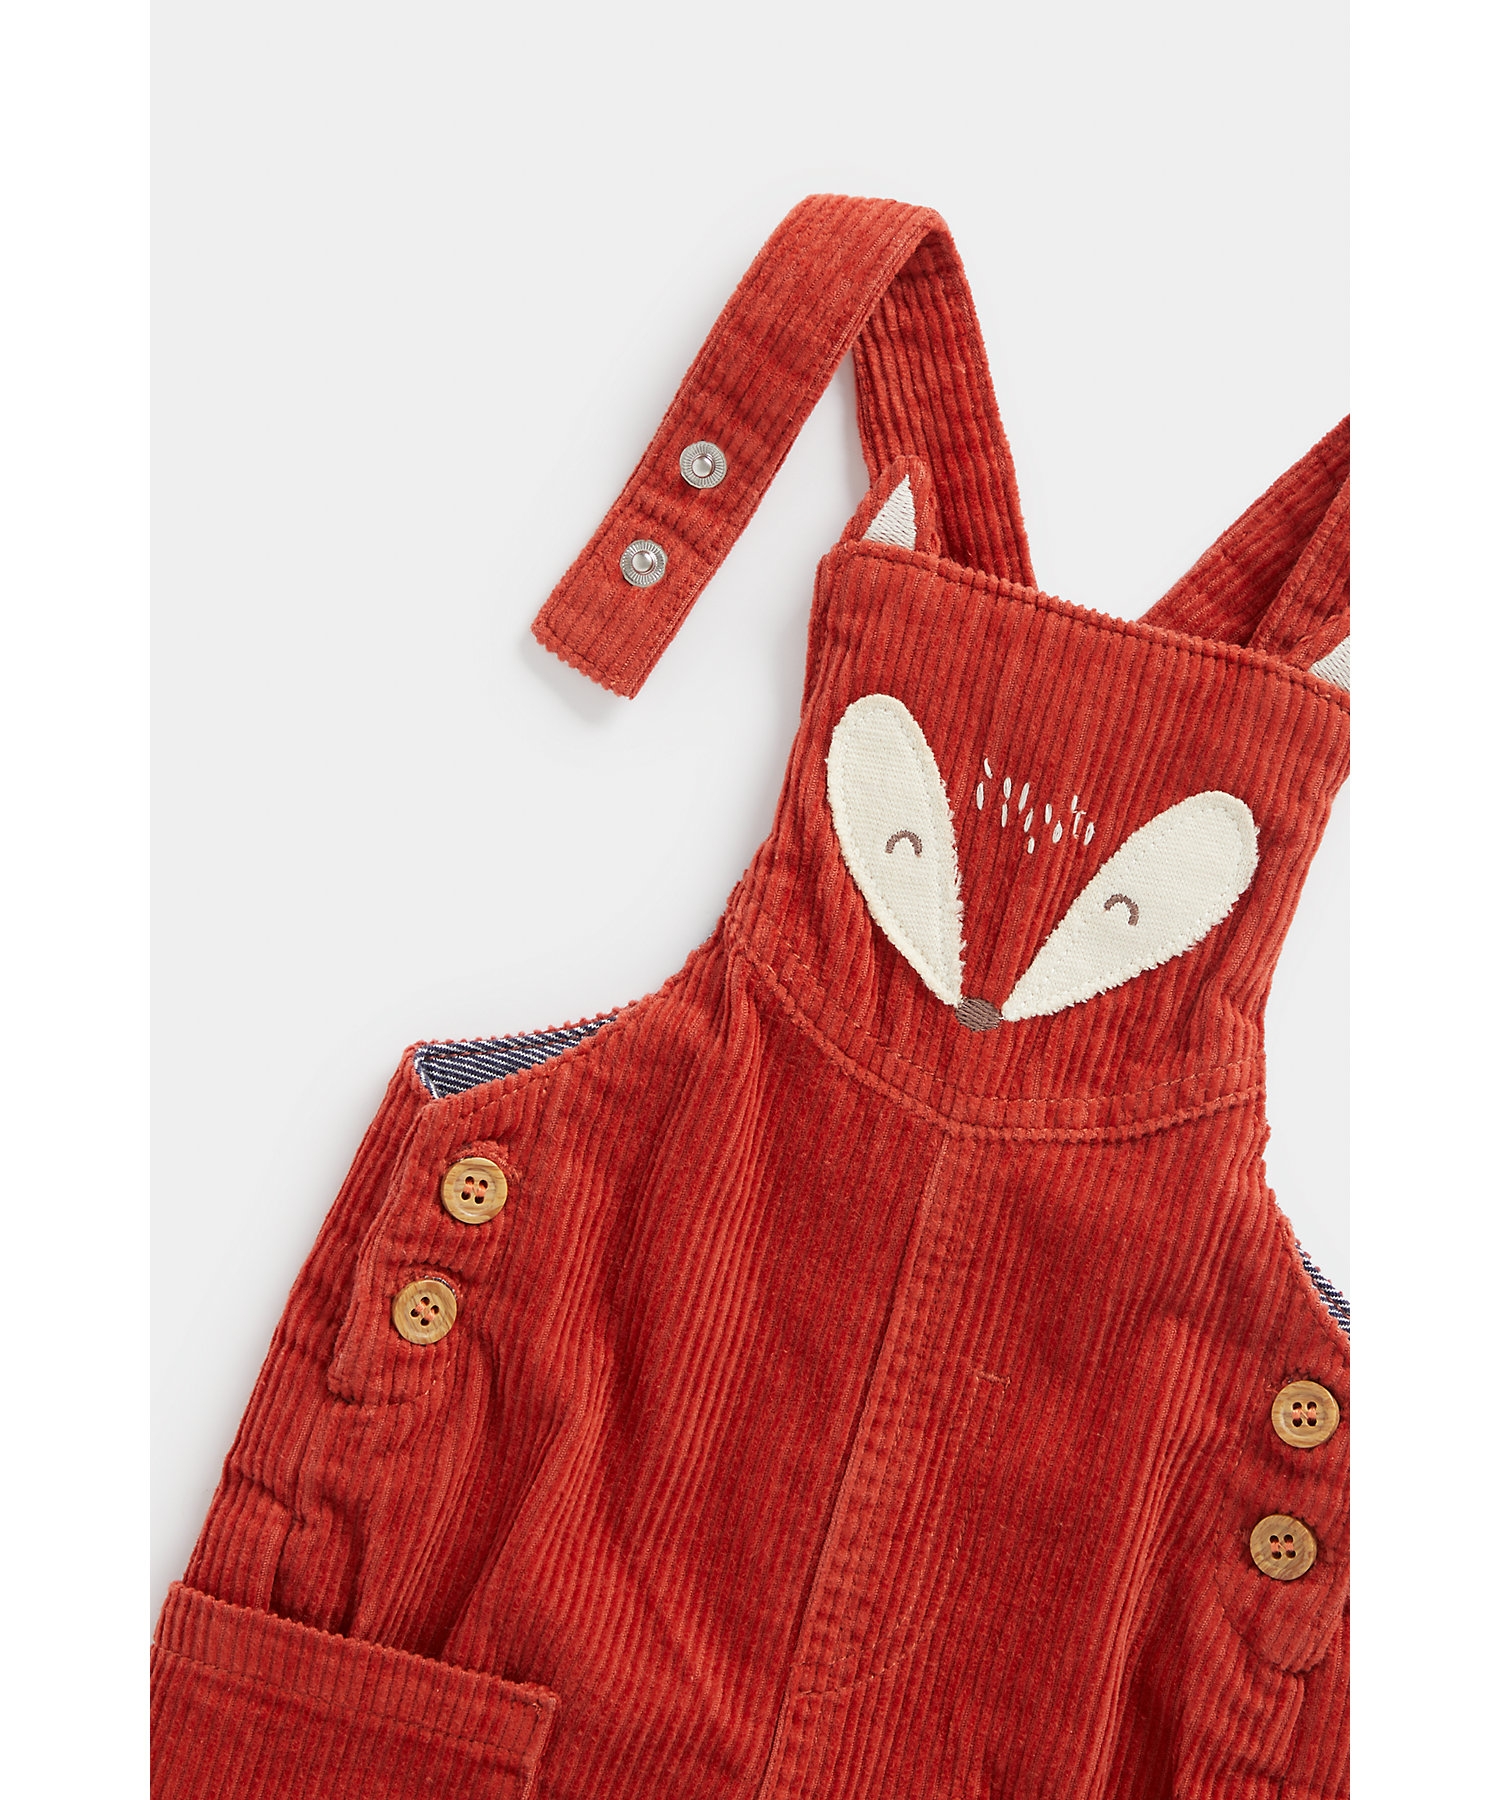 Unisex Full Sleeves Dungaree Set -Pack of 1-Red